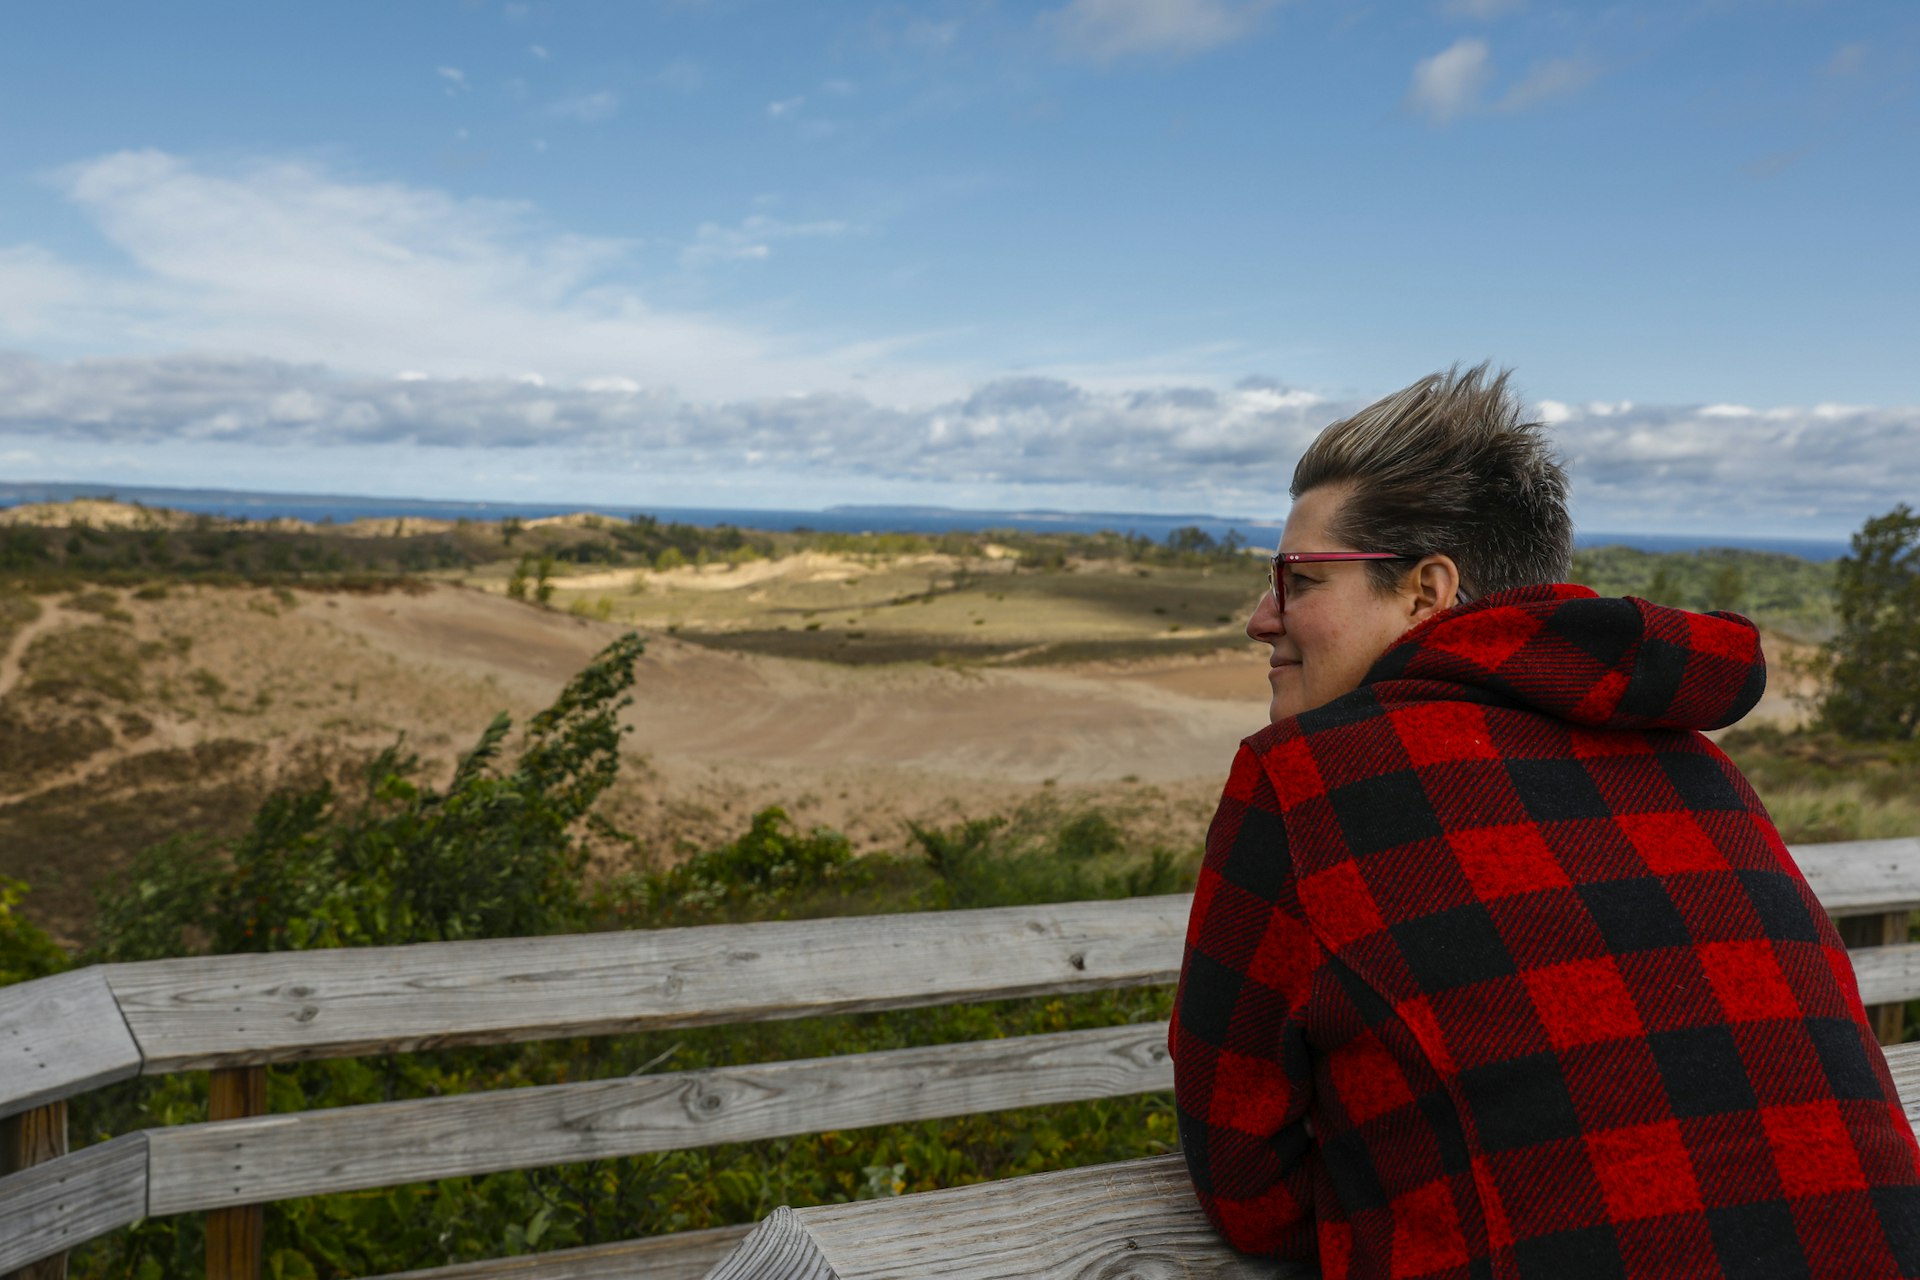 a white woman in a plaid jacket and glasses looks out across Sleeping Bear Dunes National Lakeshore with the wind whipping her short hair